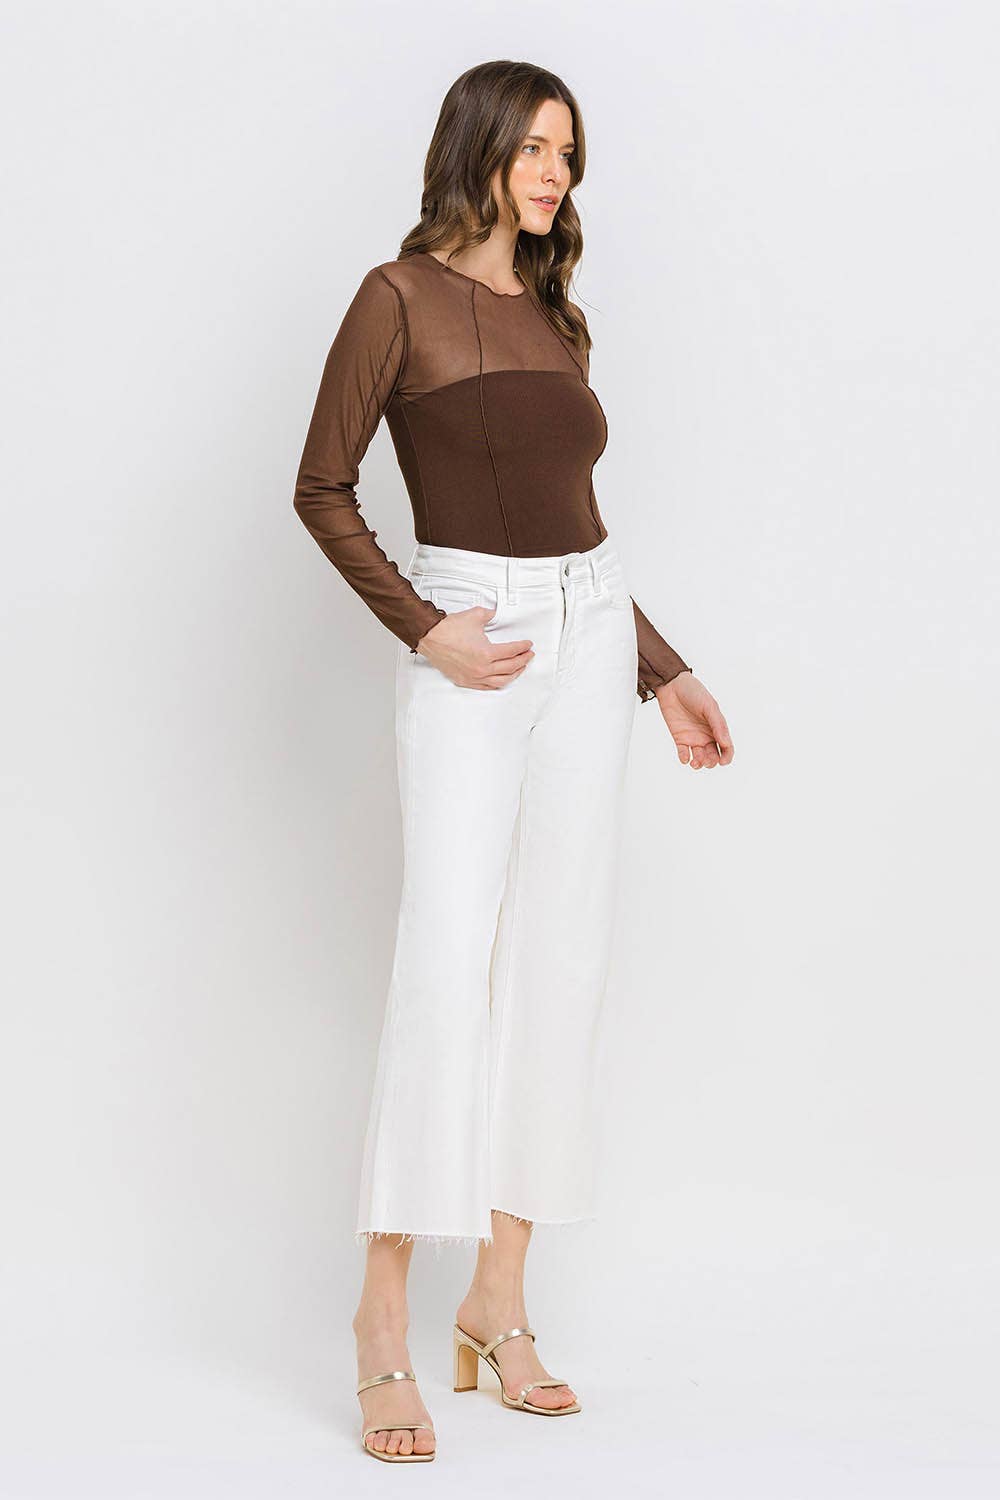 Optic White Crop Jeans